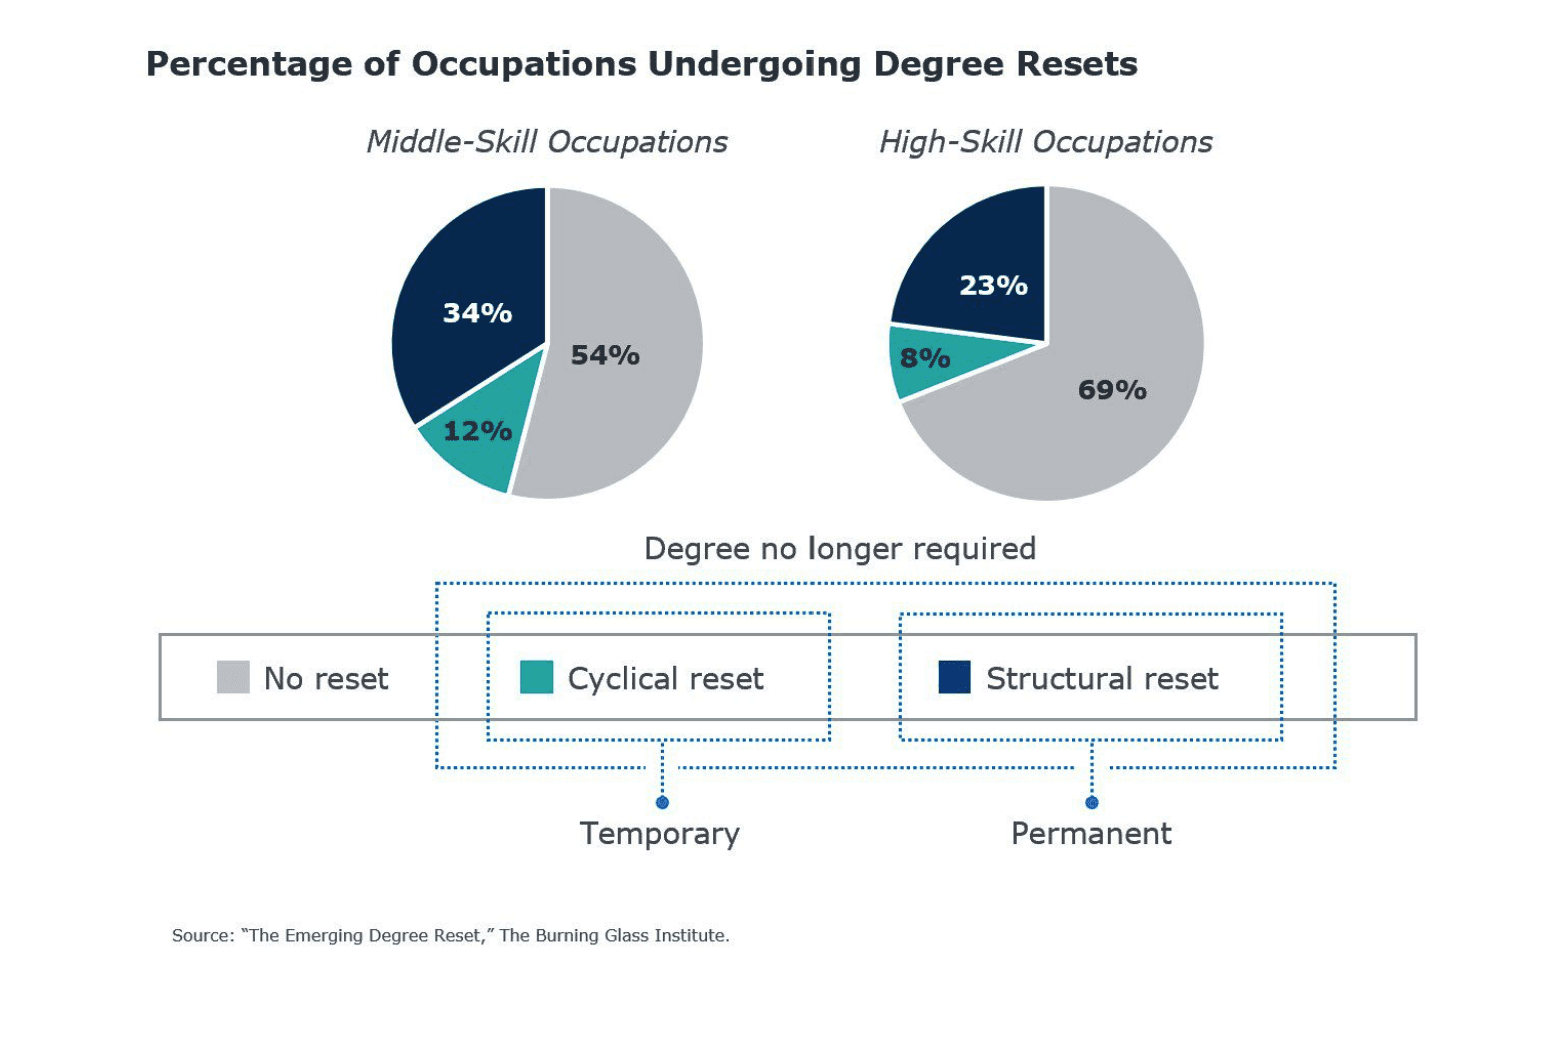 Pie chart comparing middle-skill and high-skill occupations in terms of degree resets.